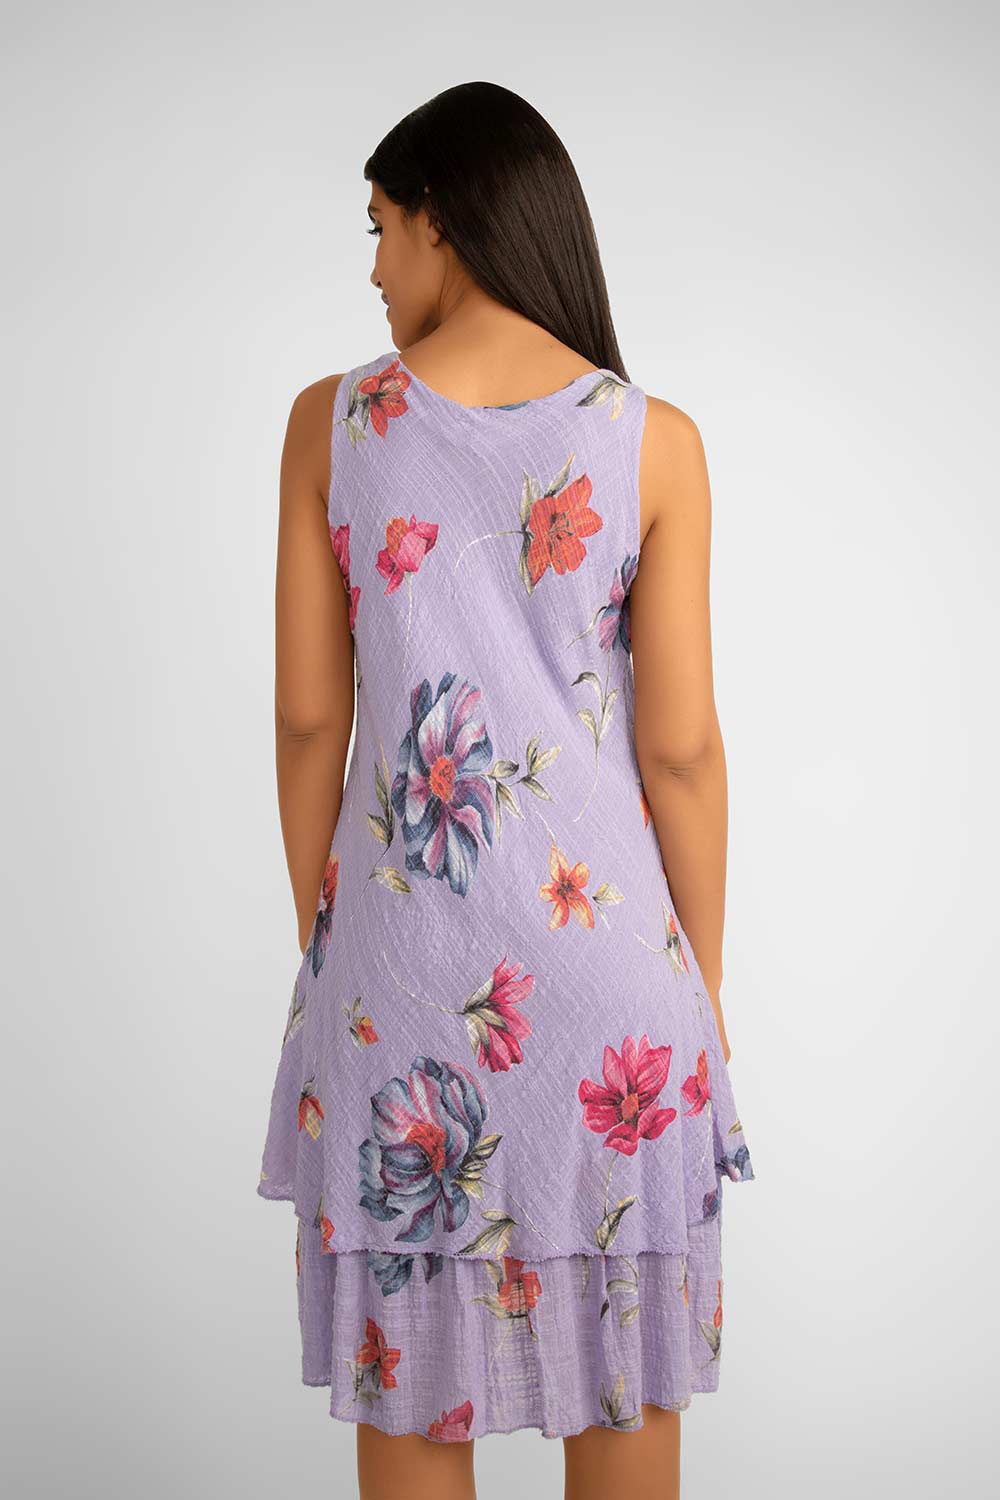 Back view of Me & Gee (S24-16-HL8903) Women's Sleeveless Floral Gauze Dress With Layered Knee Length Skirt in Lilac Purple with Floral Print